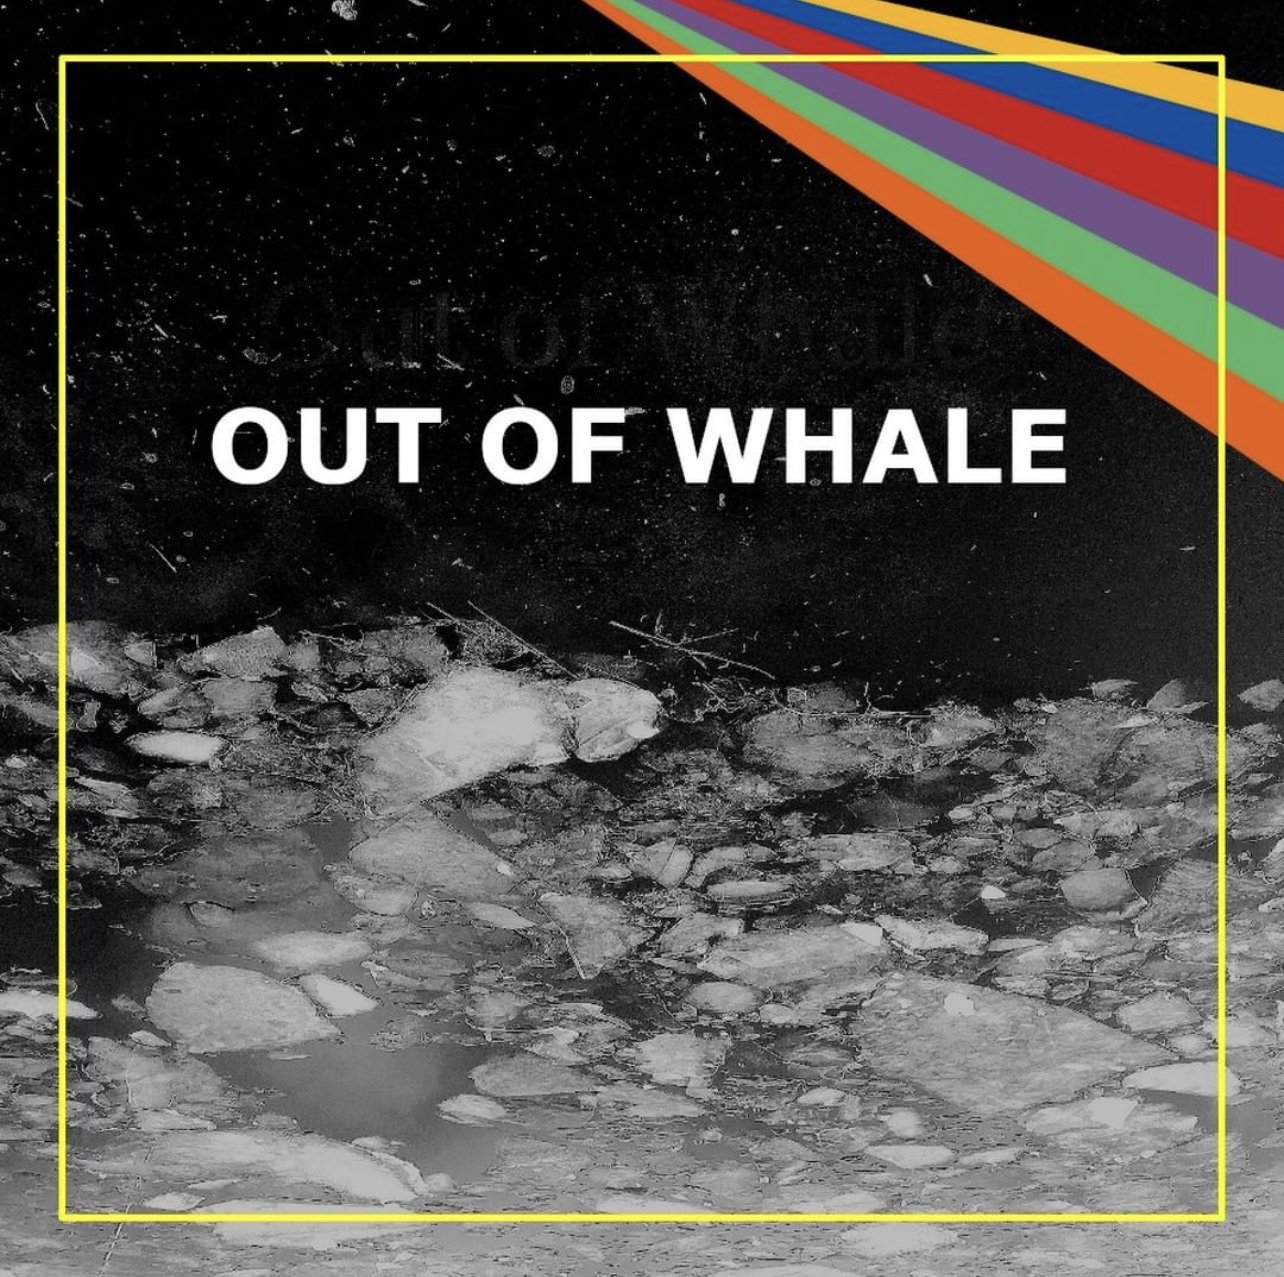 Out of Whale